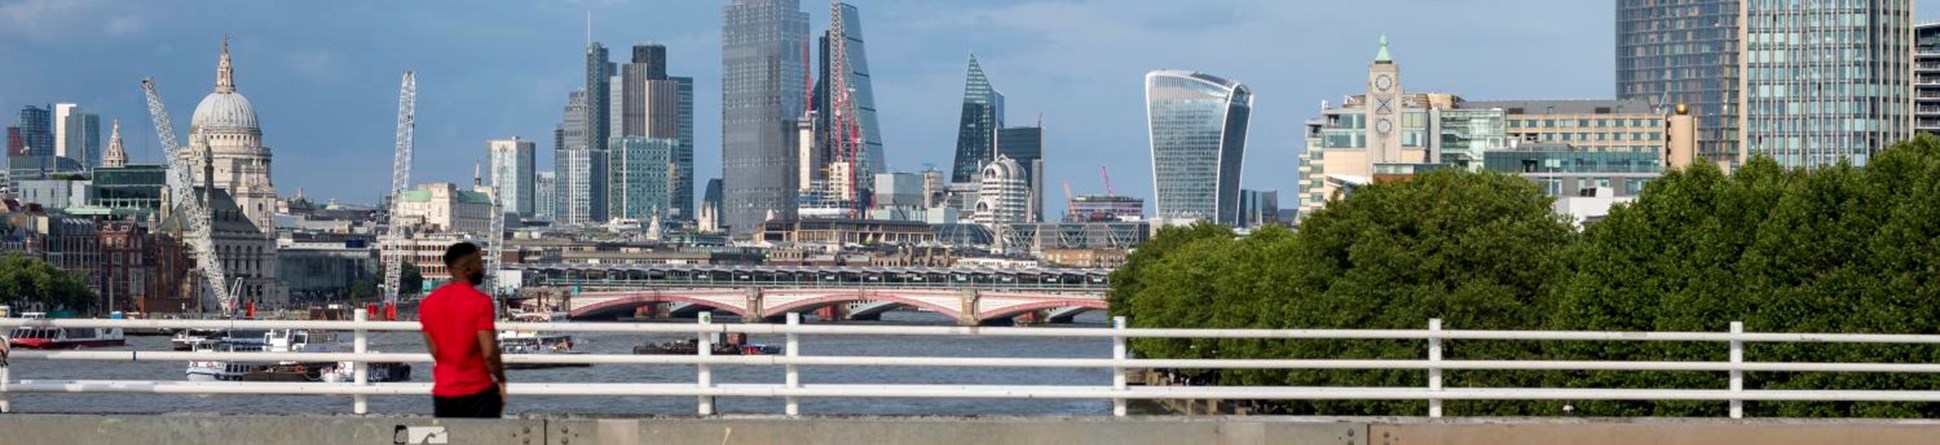 Photograph showing the view from Waterloo Bridge including St Paul's Cathedral, the skyscrapers of the City of London and the Oxo Tower in Lambeth.